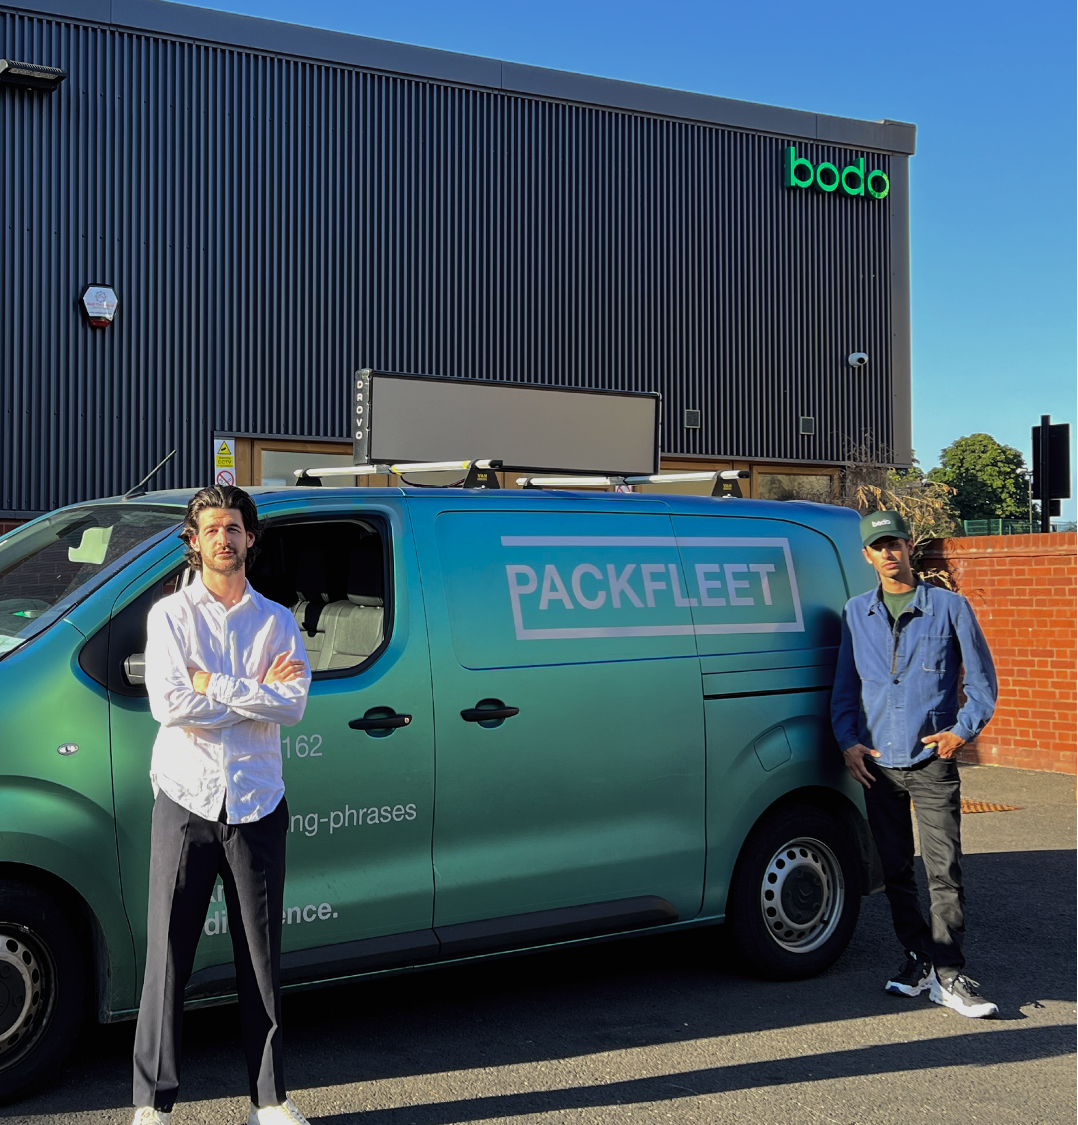 bodo teams up with Packfleet to expand carbon-neutral deliveries across London